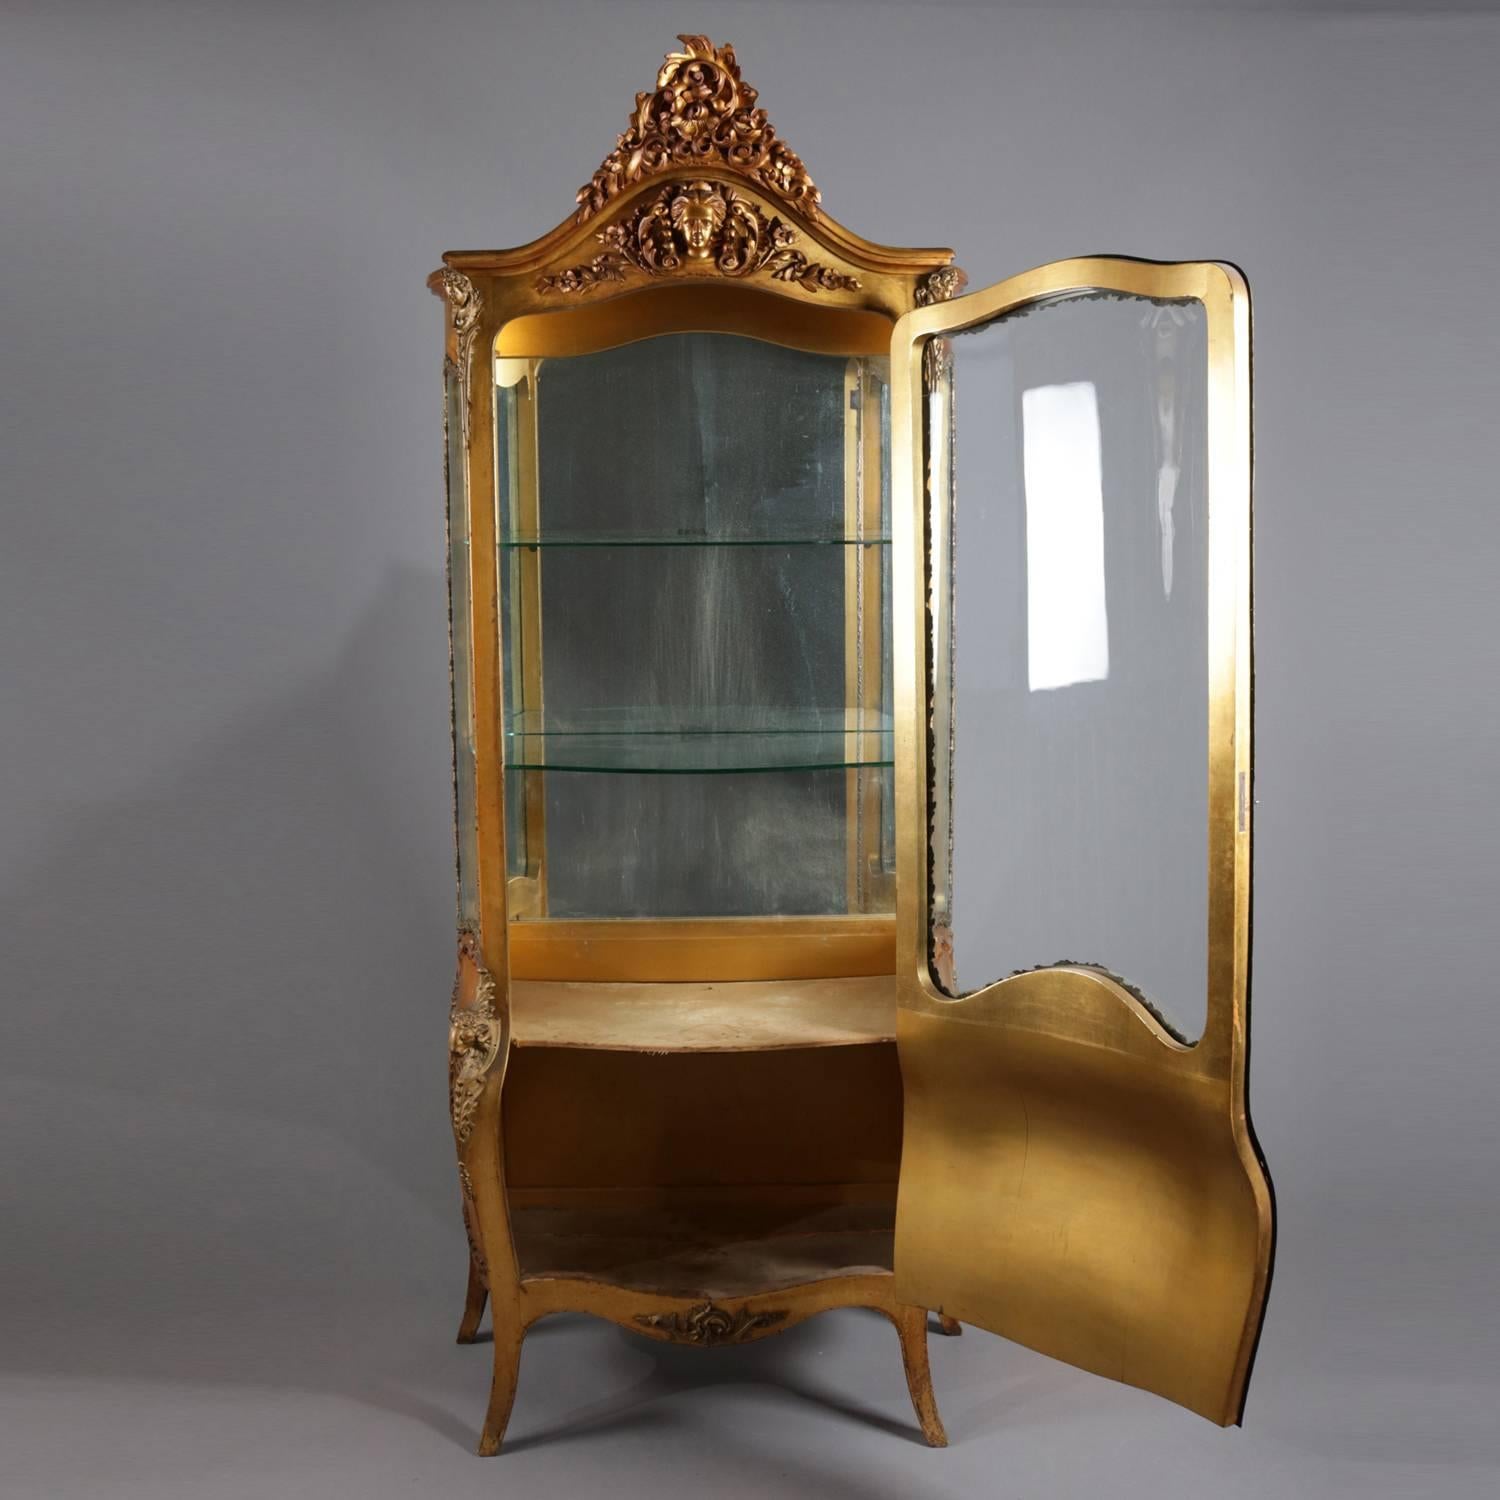 Antique French Rococo figural vitrine features carved giltwood construction with scroll and foliate cartouche above Jenny Lind mask crest, bow front single door with bombe form lower and central Jenny Lind mask opens to reveal mirror back display